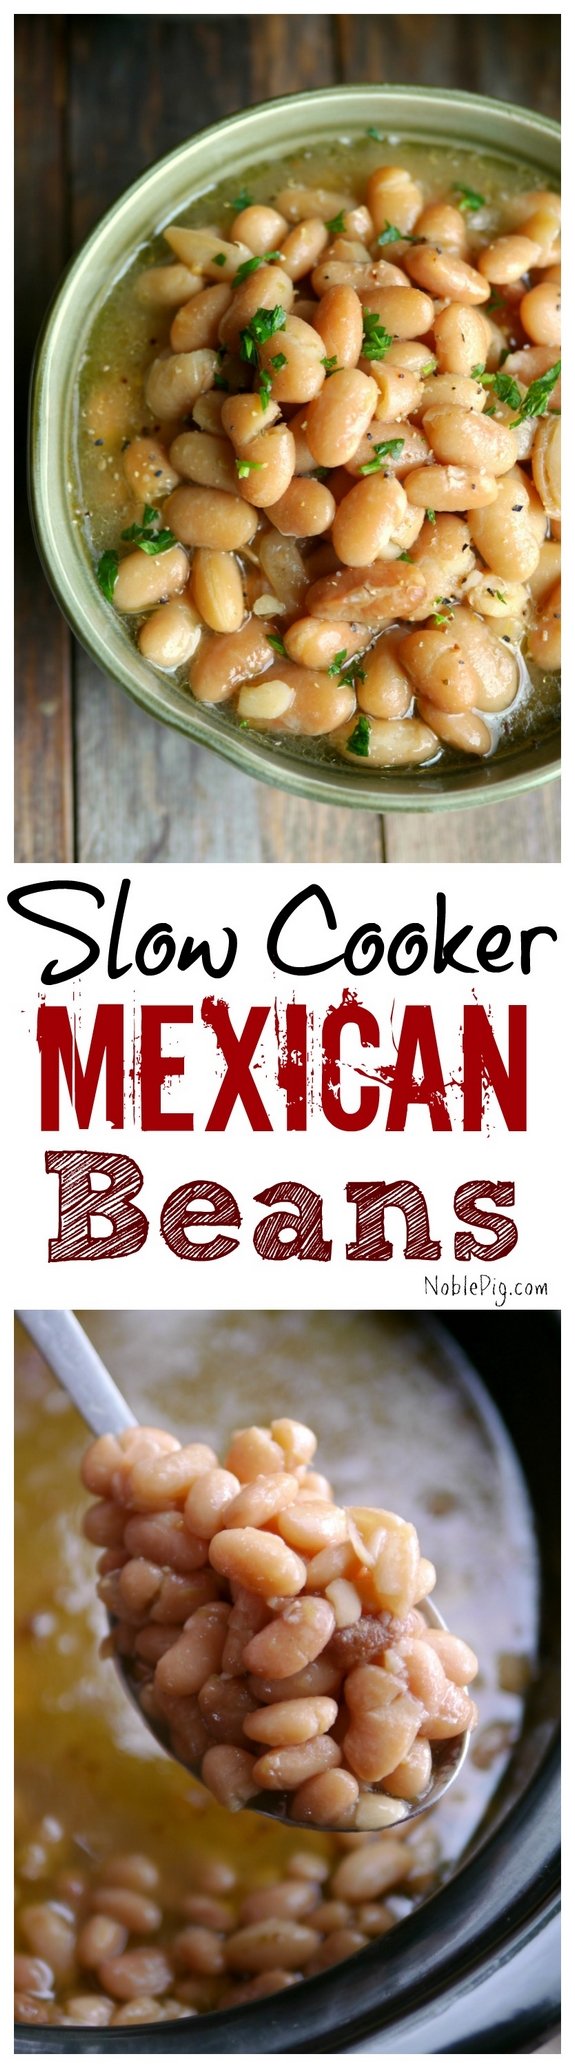 Slow Cooker Mexican Beans